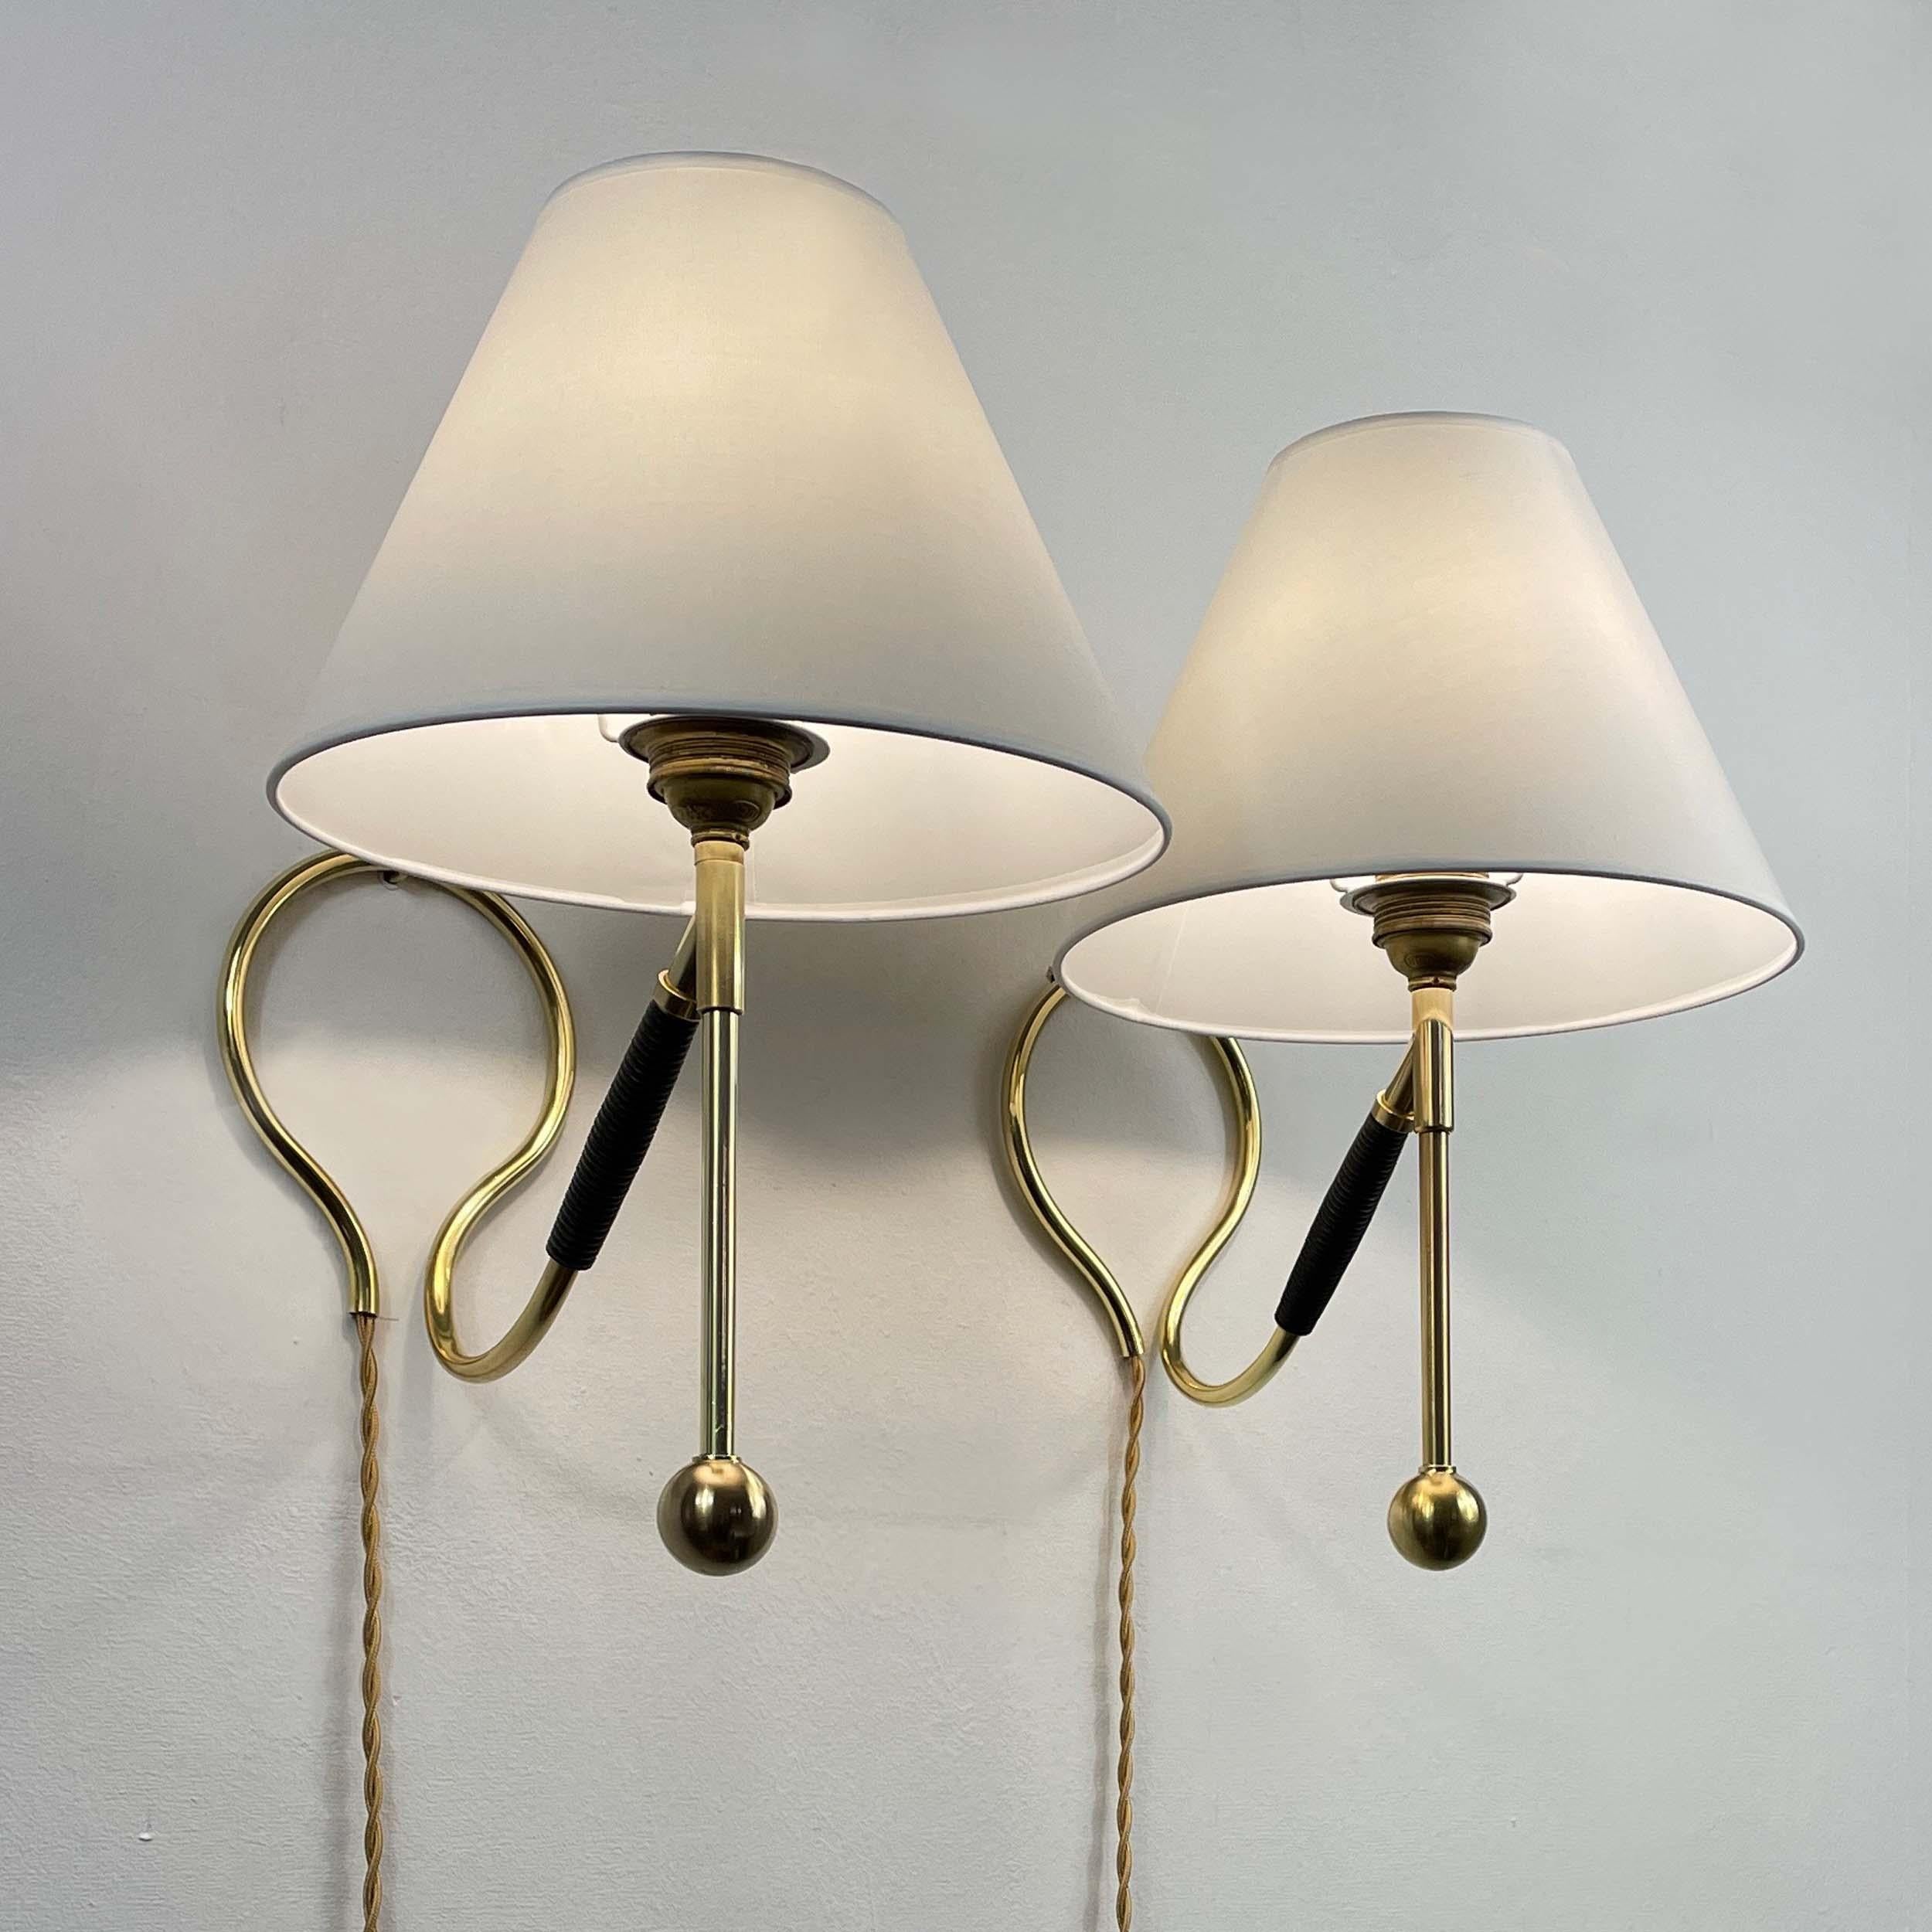 Adjustable Brass and Bakelite Wall and Table Lights 306 by Kaare Klint, 1950s For Sale 6